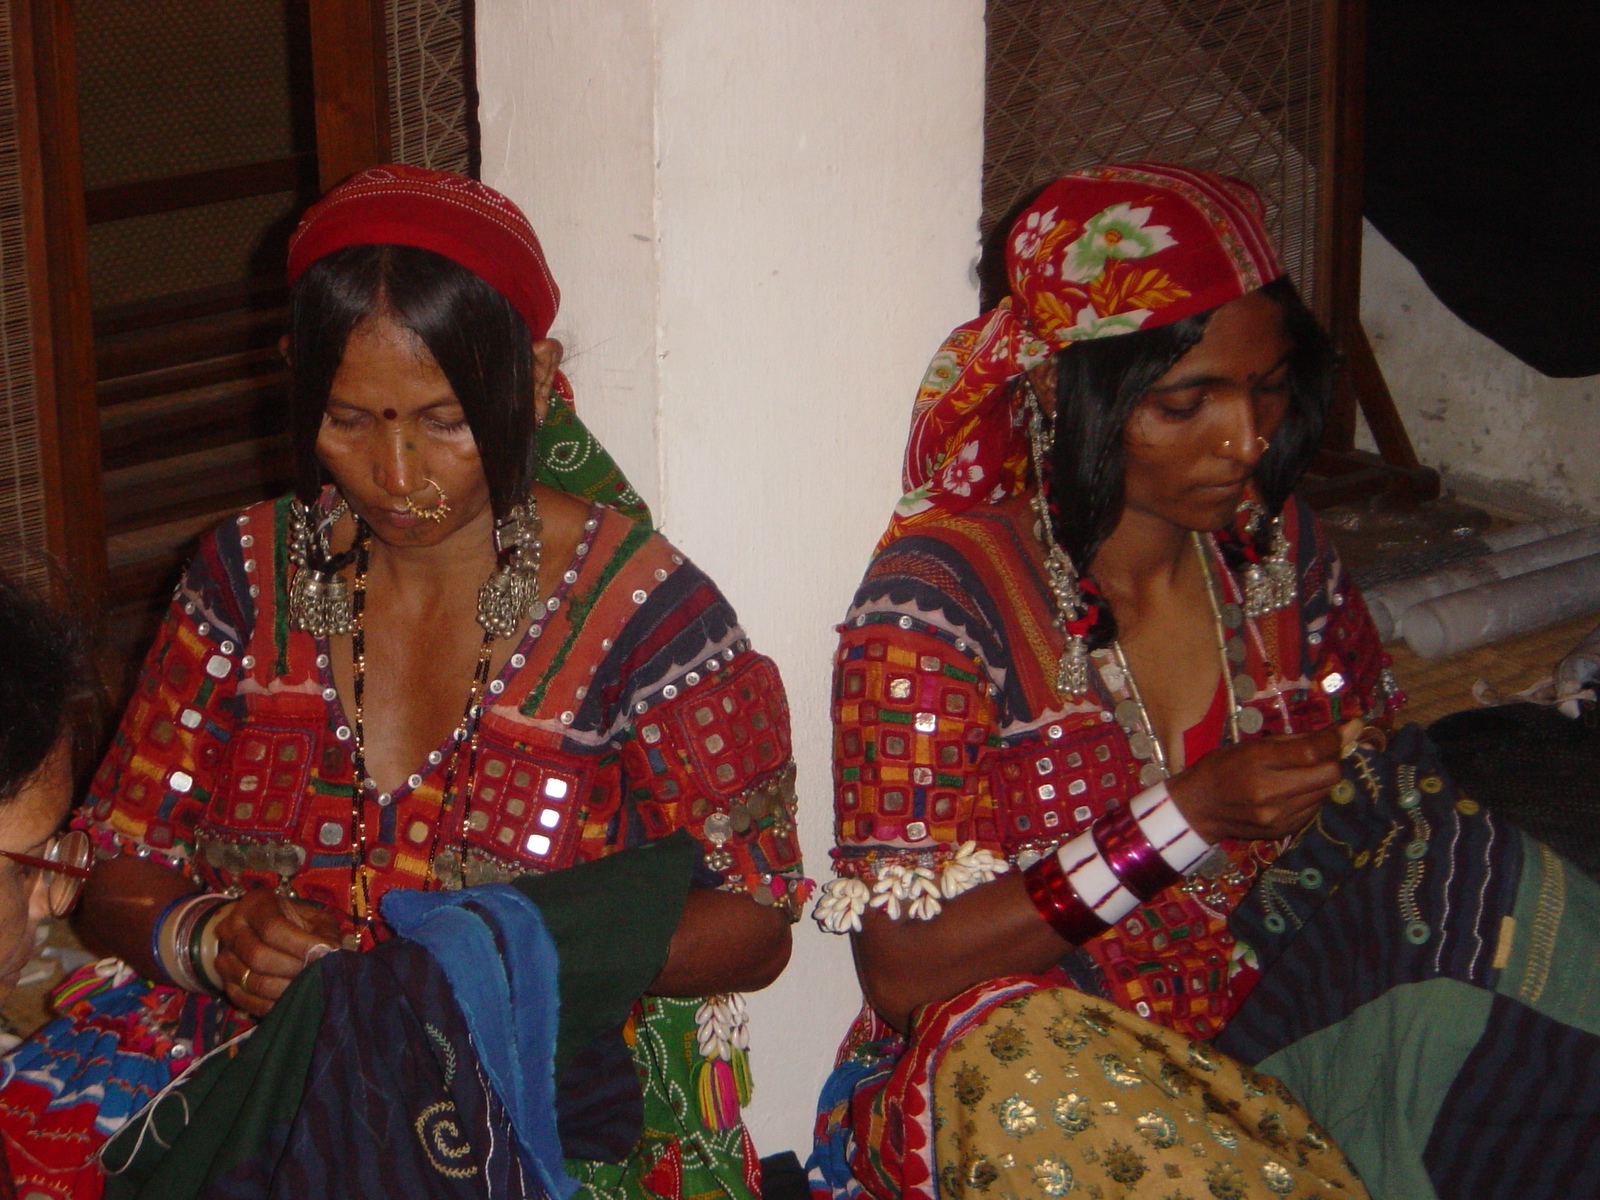 Banjara Embroidery | The Encyclopedia of Crafts in WCC-Asia Pacific Region  (EC-APR)